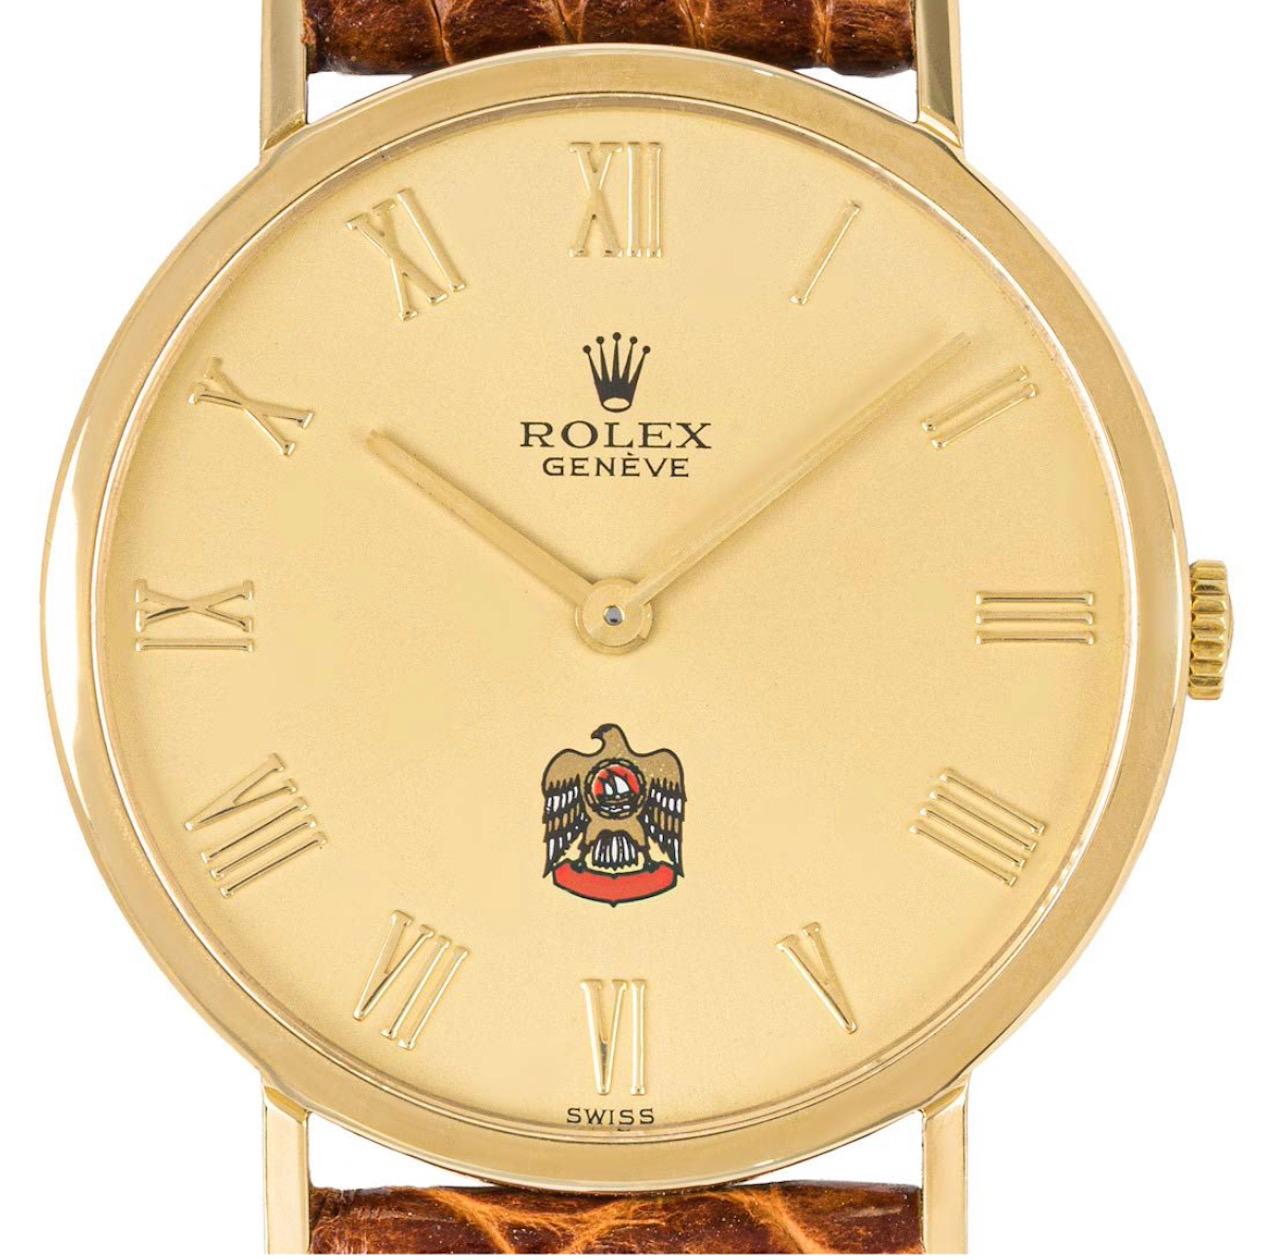 A mens 32mm Cellini wristwatch in yellow gold by Rolex. Features a silver dial with a distinctive UAE emblem at 6 o'clock and applied roman numerals. Fitted with a sapphire glass, a manual winding movement and a generic brown leather strap set with